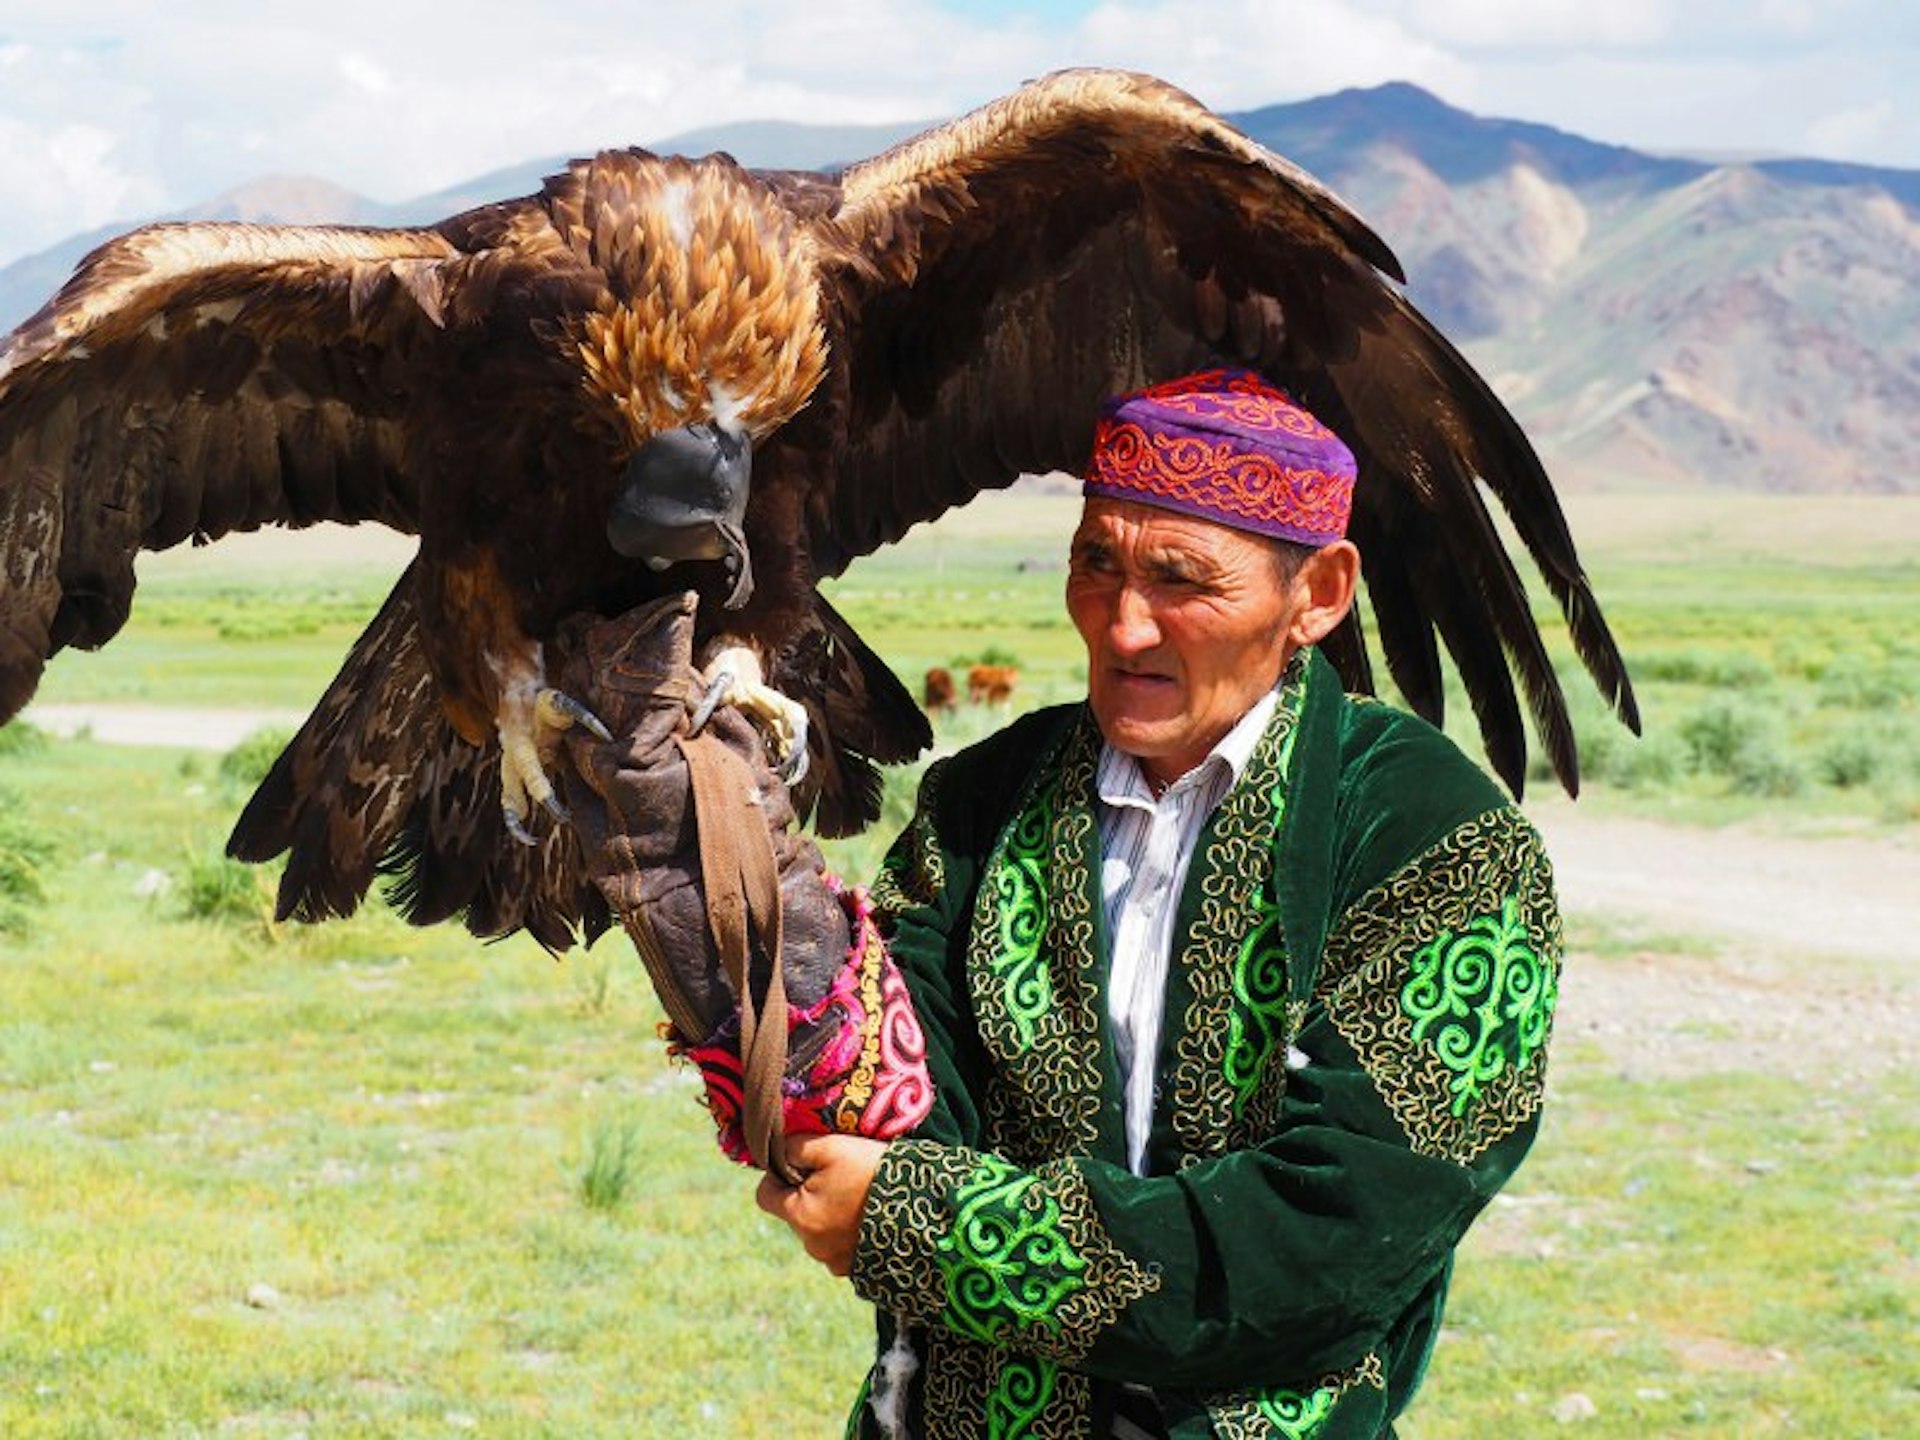 Eagle hunting is still an important custom in the Kazakh communities of western Mongolia © Olivia Pozzan / Lonely Planet